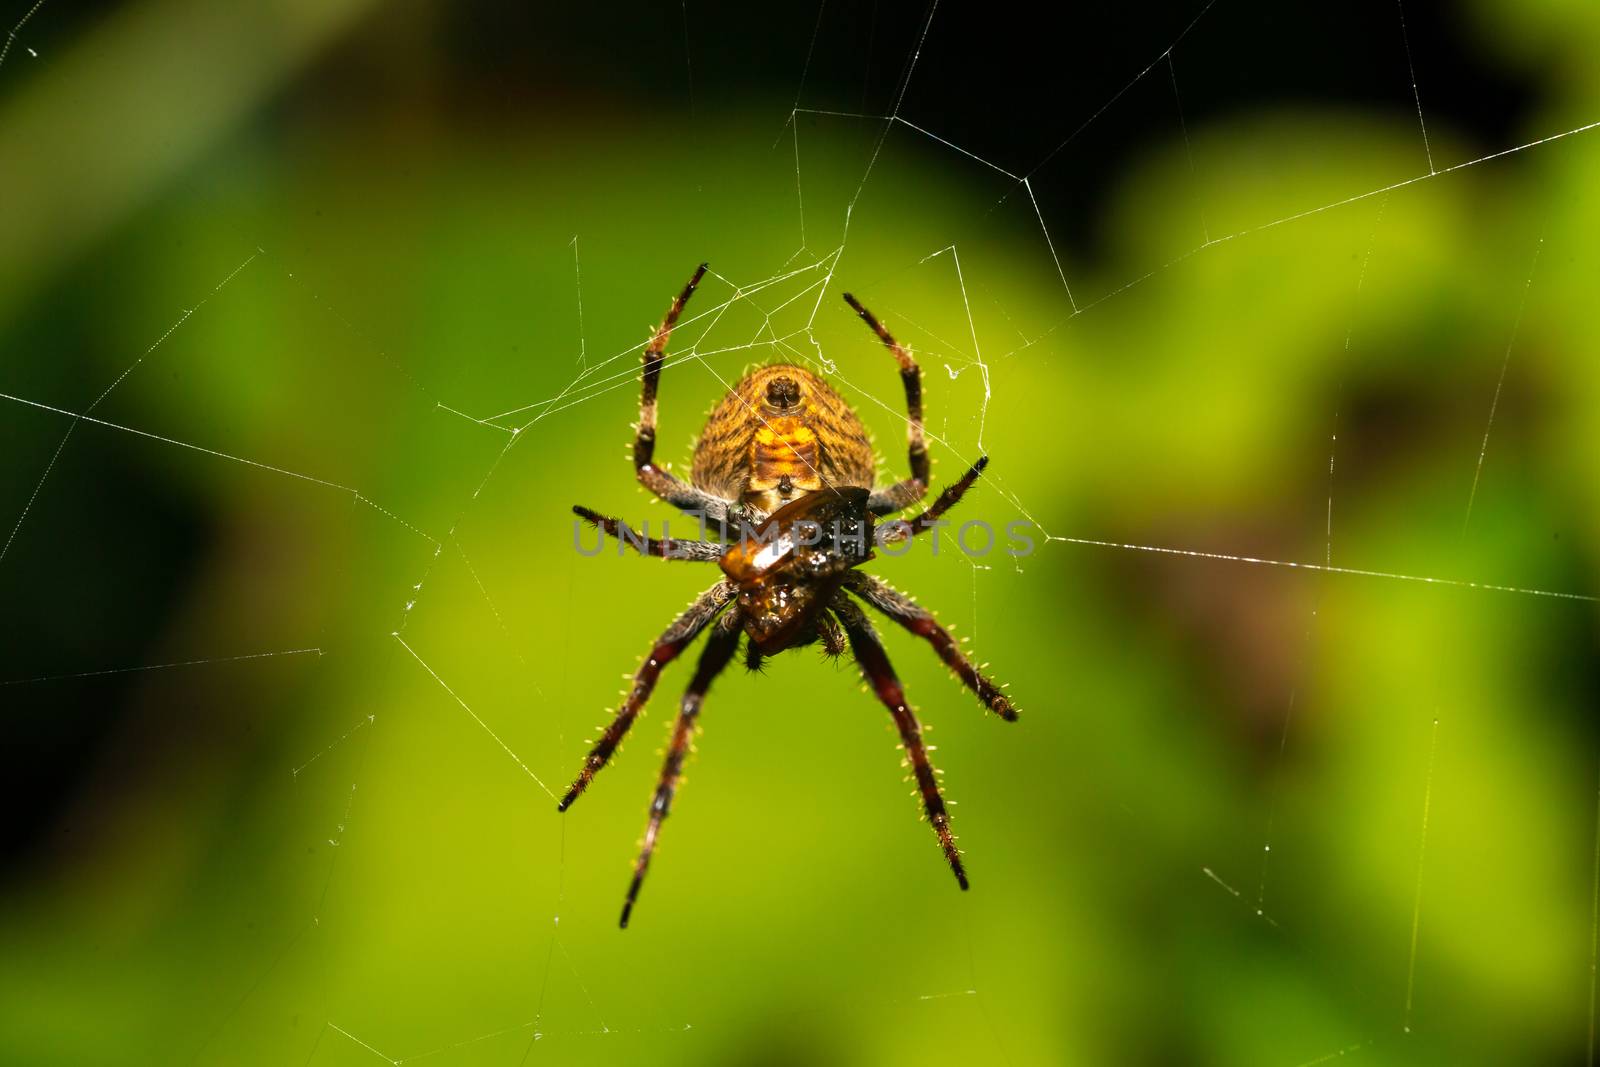 A spider in its web in the rainforest by 25ehaag6